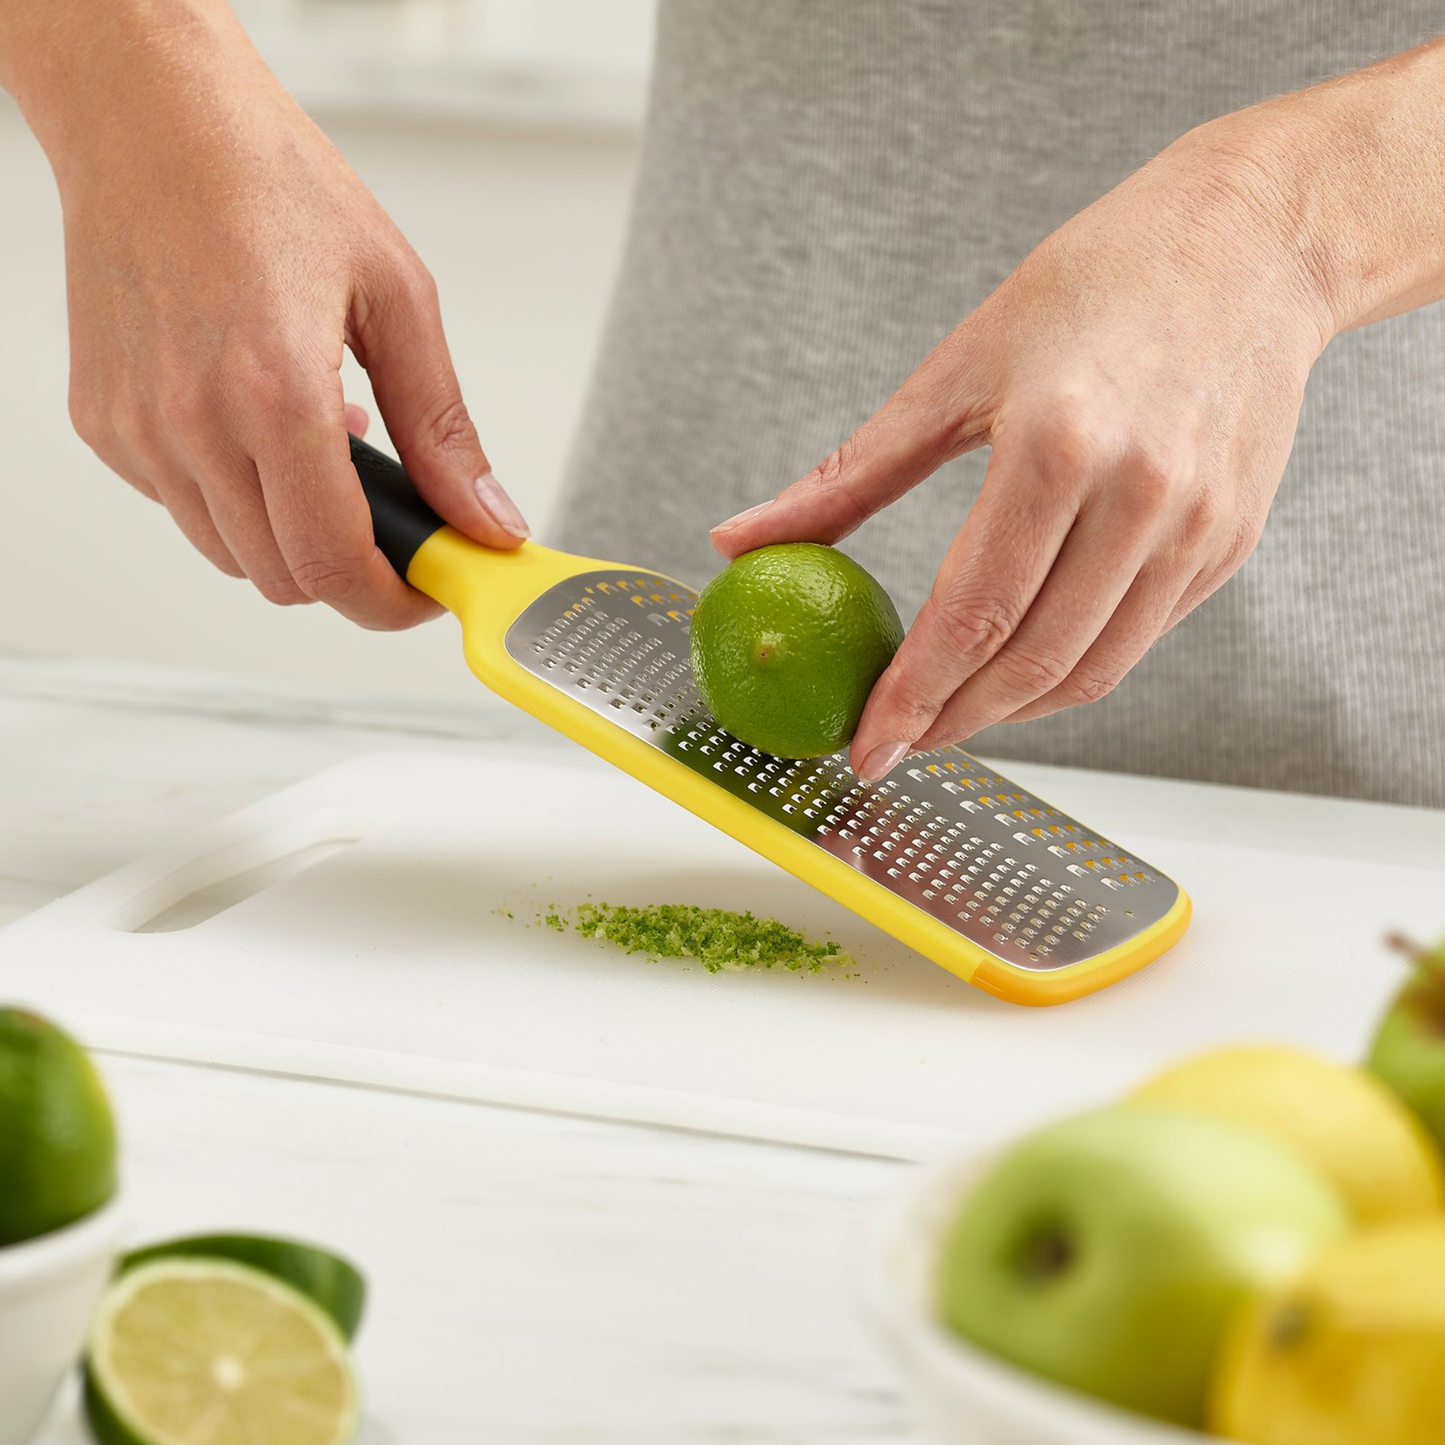 The multi-grate paddle grater zesting a lime